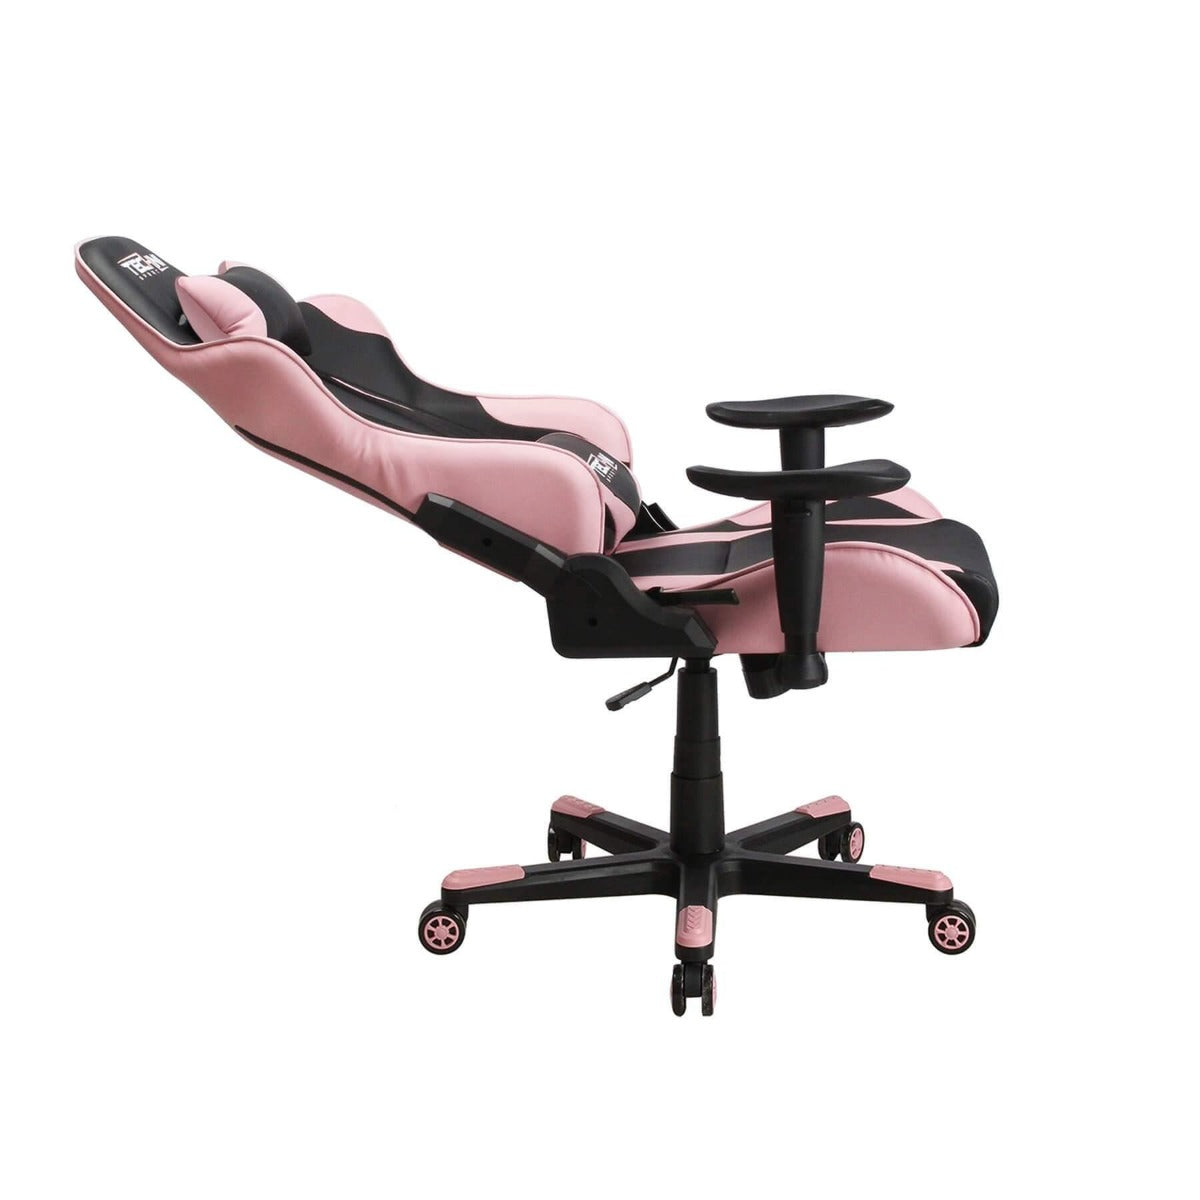 Techni Sport TS-4300 Pink Ergonomic High Back Racer Style PC Gaming Chair RTA-TS43-PNK Reclined